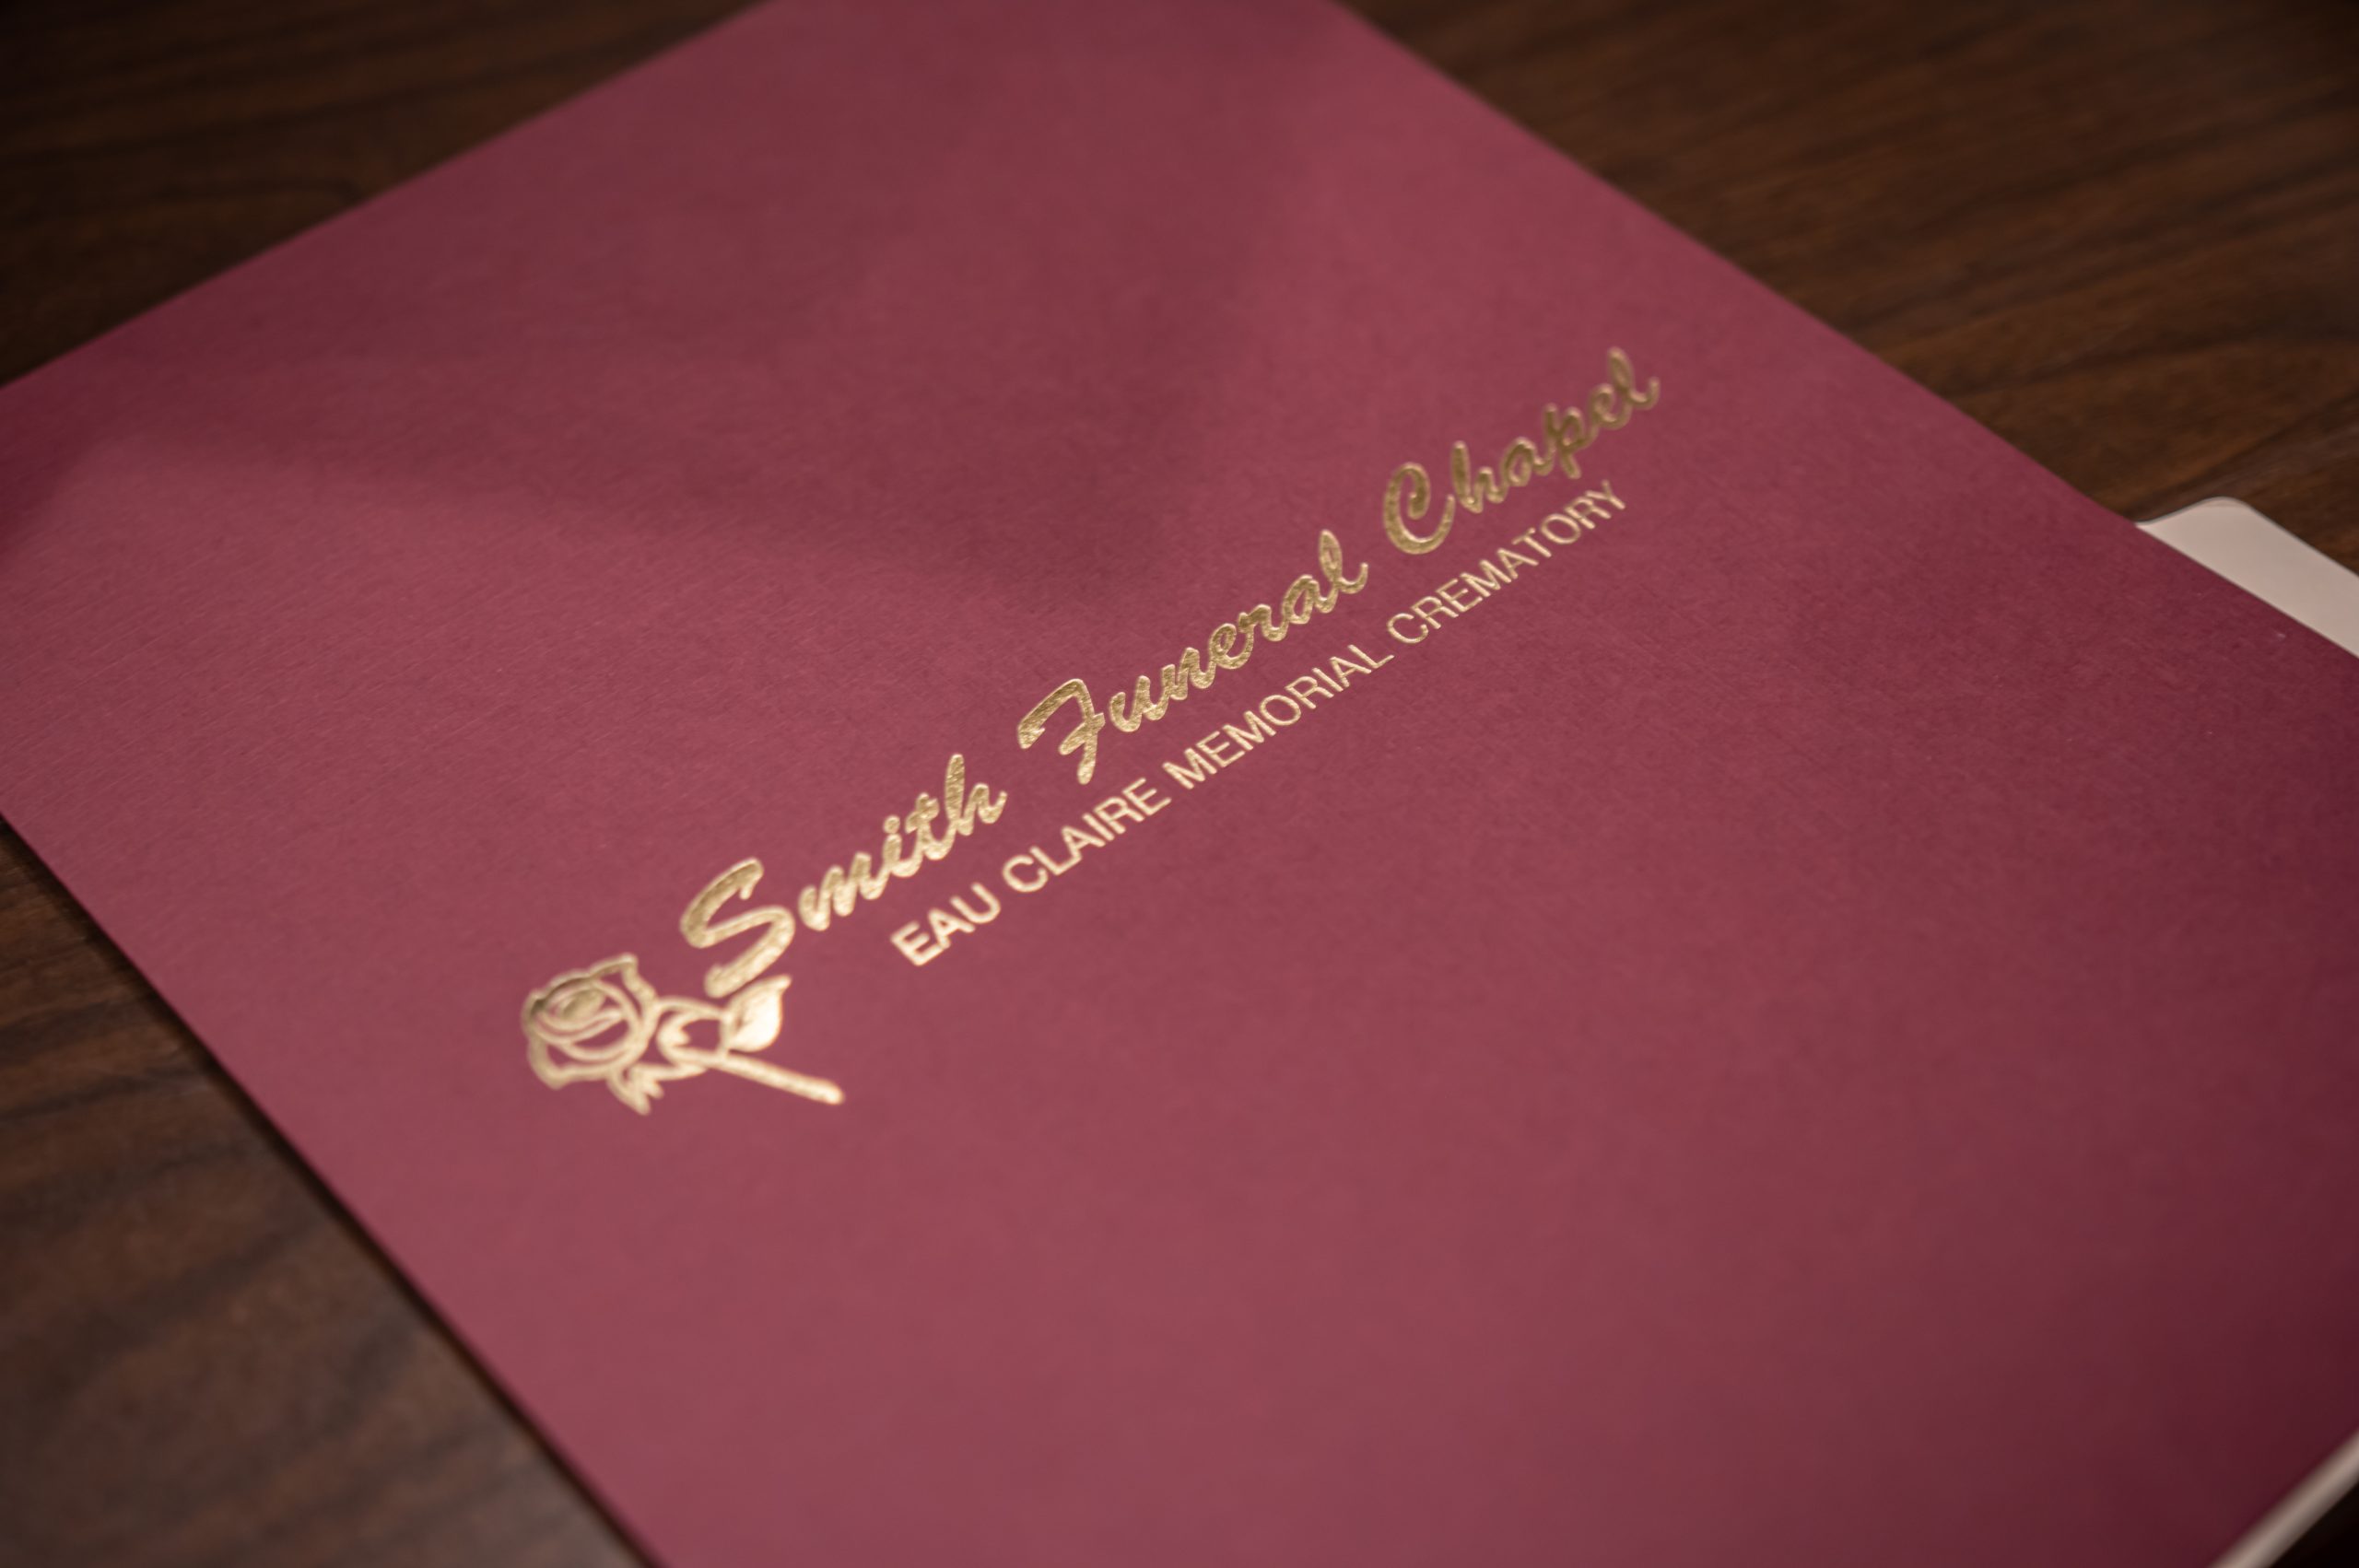 Smith Funeral Home - Documents Folder